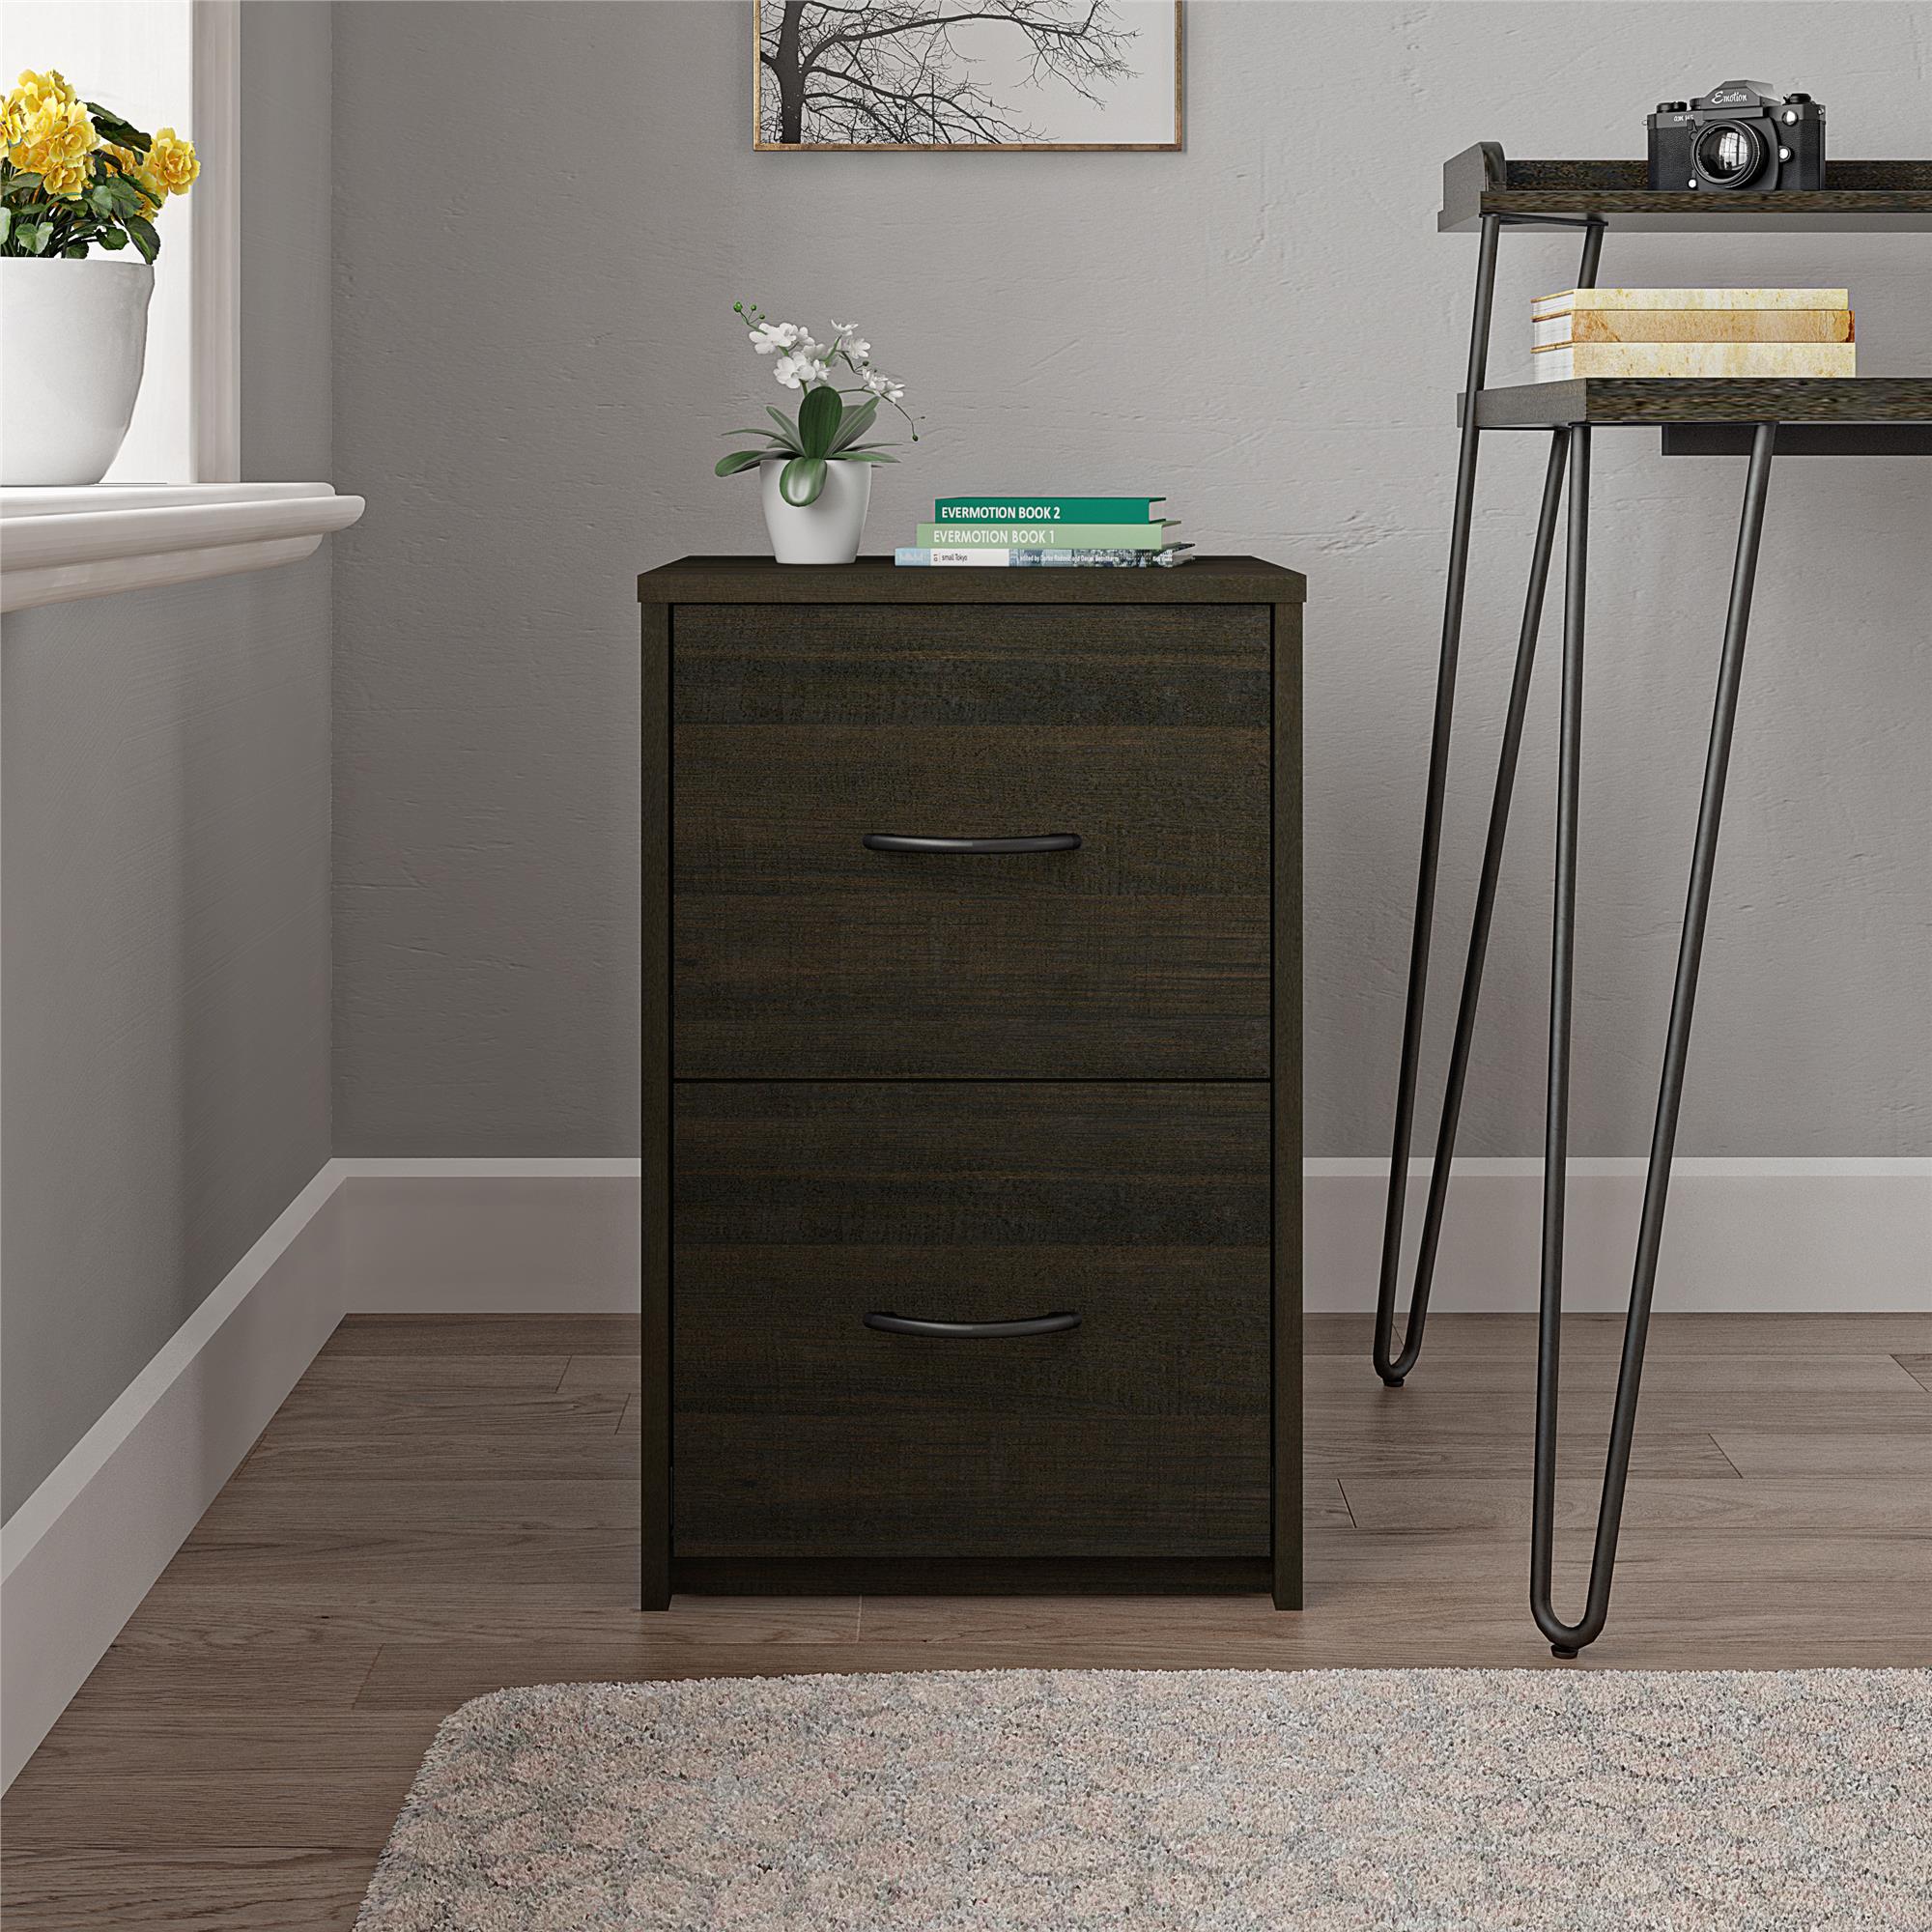 Ameriwood Home Core 2 Drawer File Cabinet, Espresso - image 1 of 5